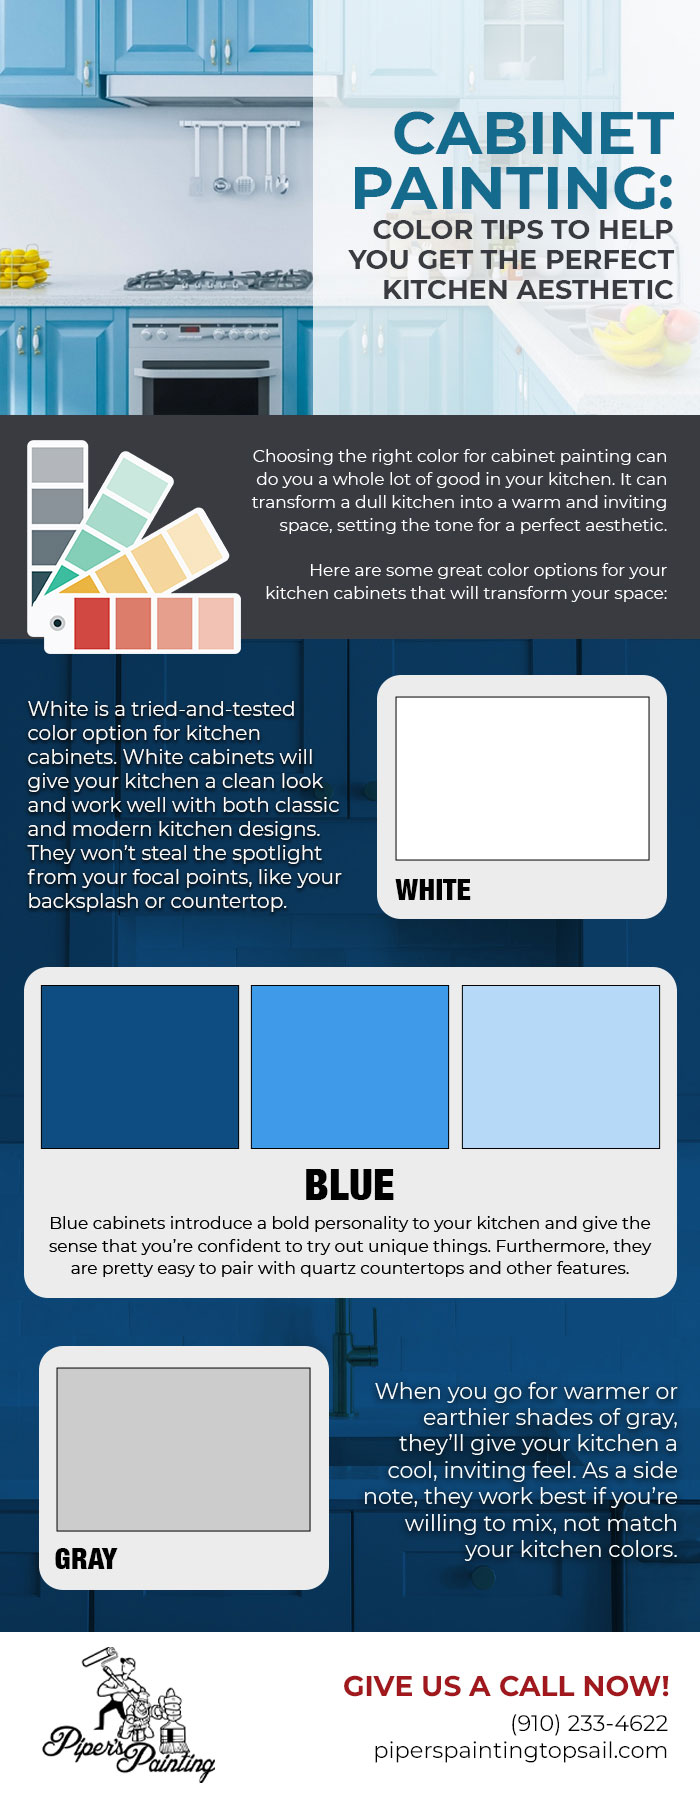 Cabinet Painting: Color Tips To Help You Get the Perfect Kitchen Aesthetic 